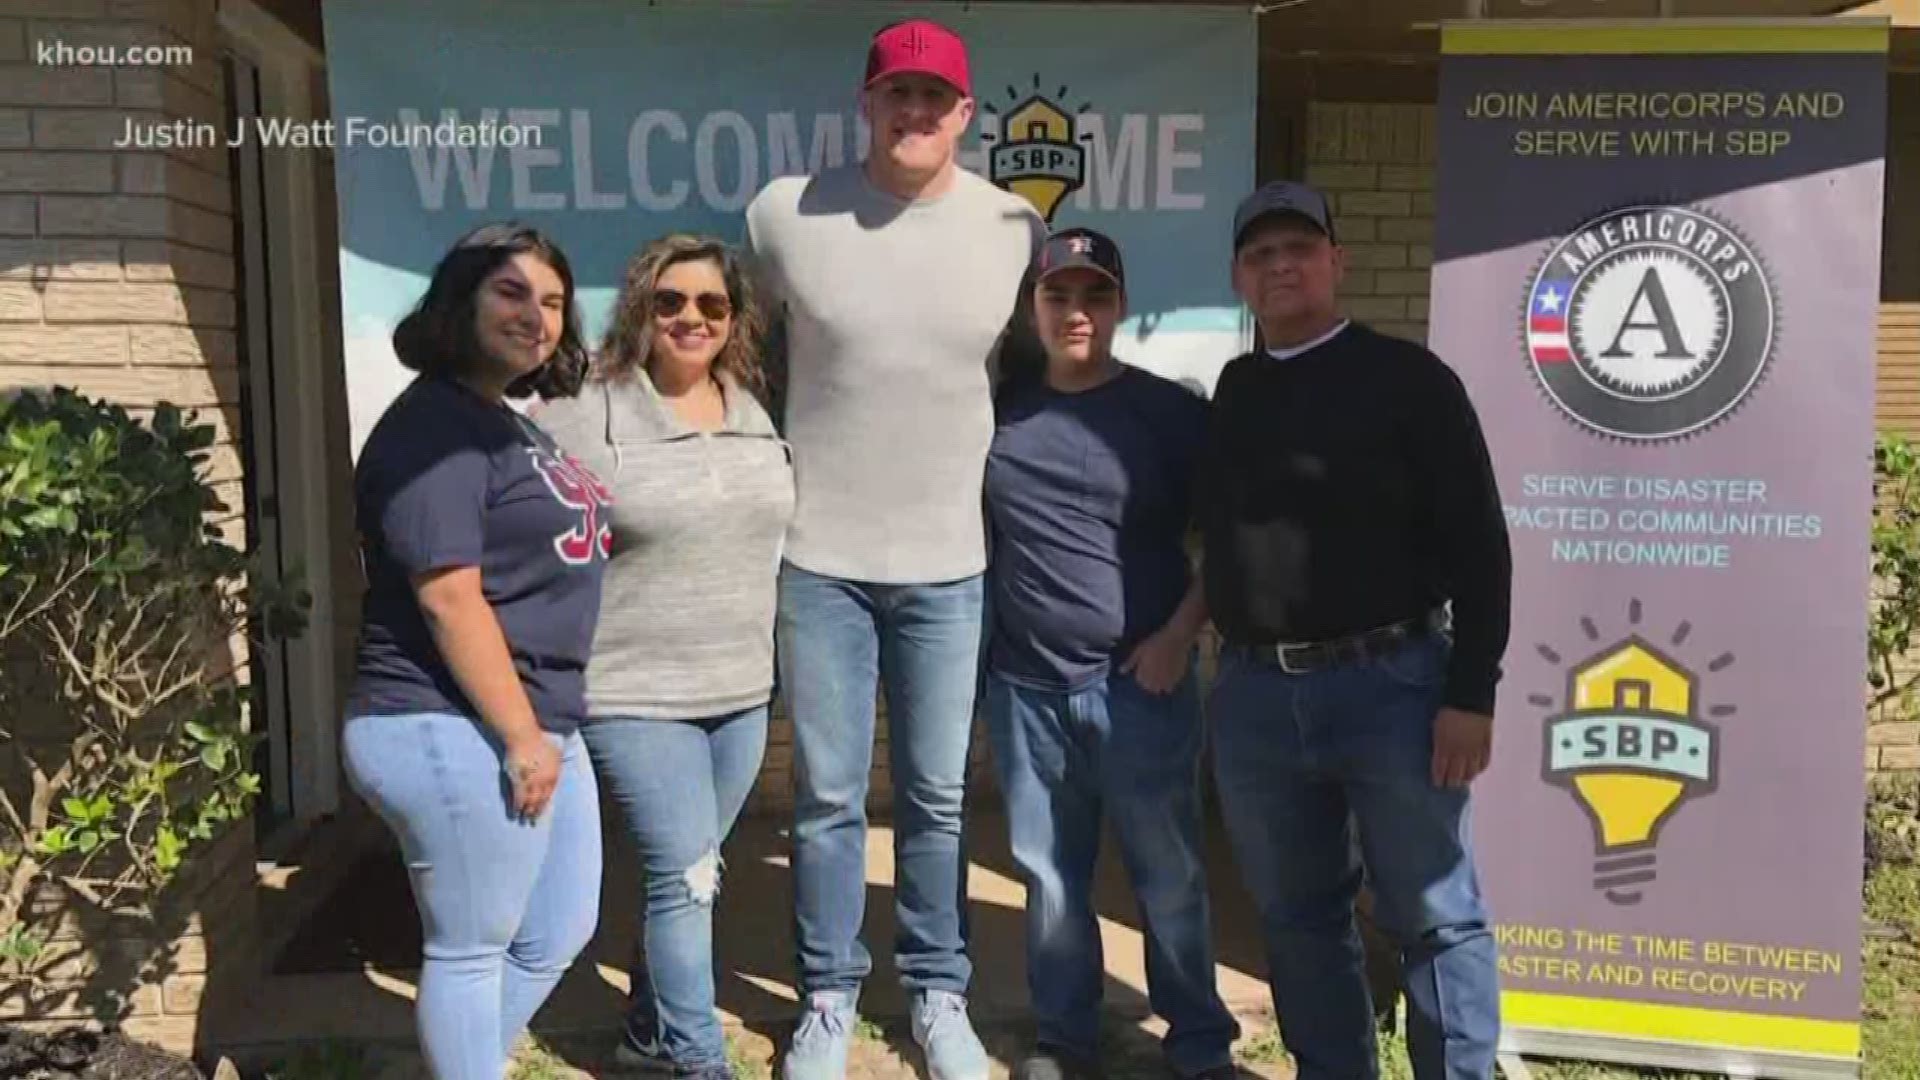 Houston Texans star J.J. Watt on Thursday released the two-year update on the recovery funds he helped raise after Hurricane Harvey devastated the Houston area.